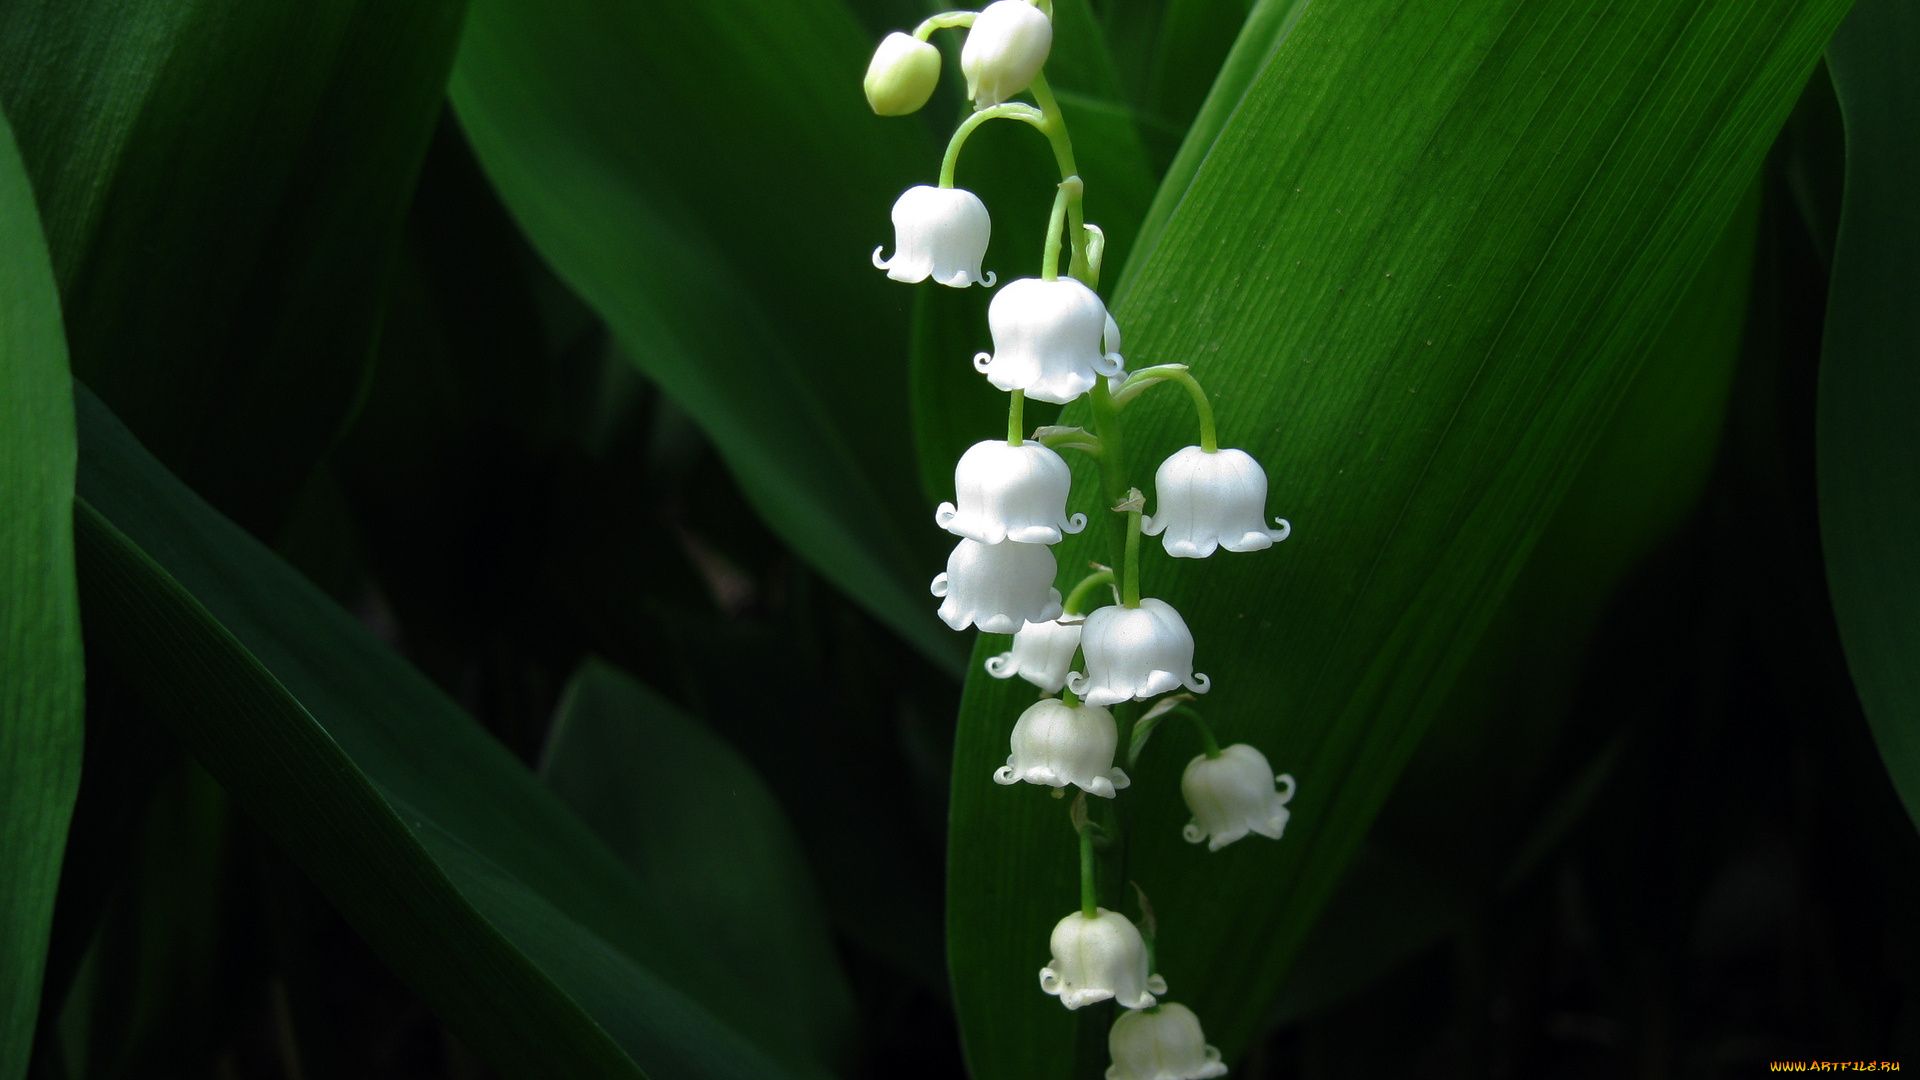 Lily Of The Valley hd wallpaper download